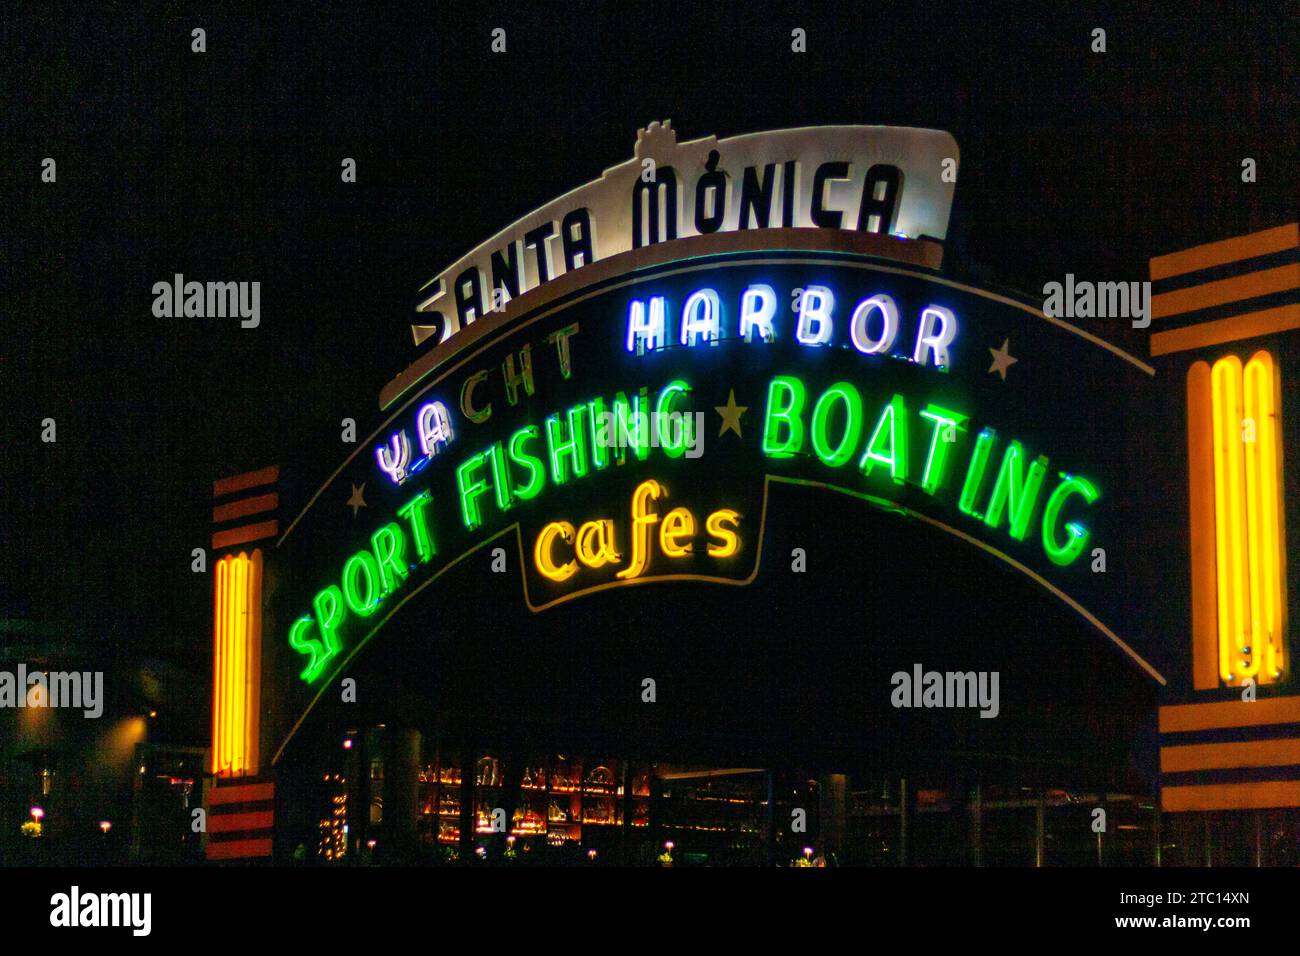 Neon sign at Santa Monica Pier in Santa Monica, California, with some lights out, off, or damaged. Landmark sign at entrance to Santa Monica Pier. Stock Photo